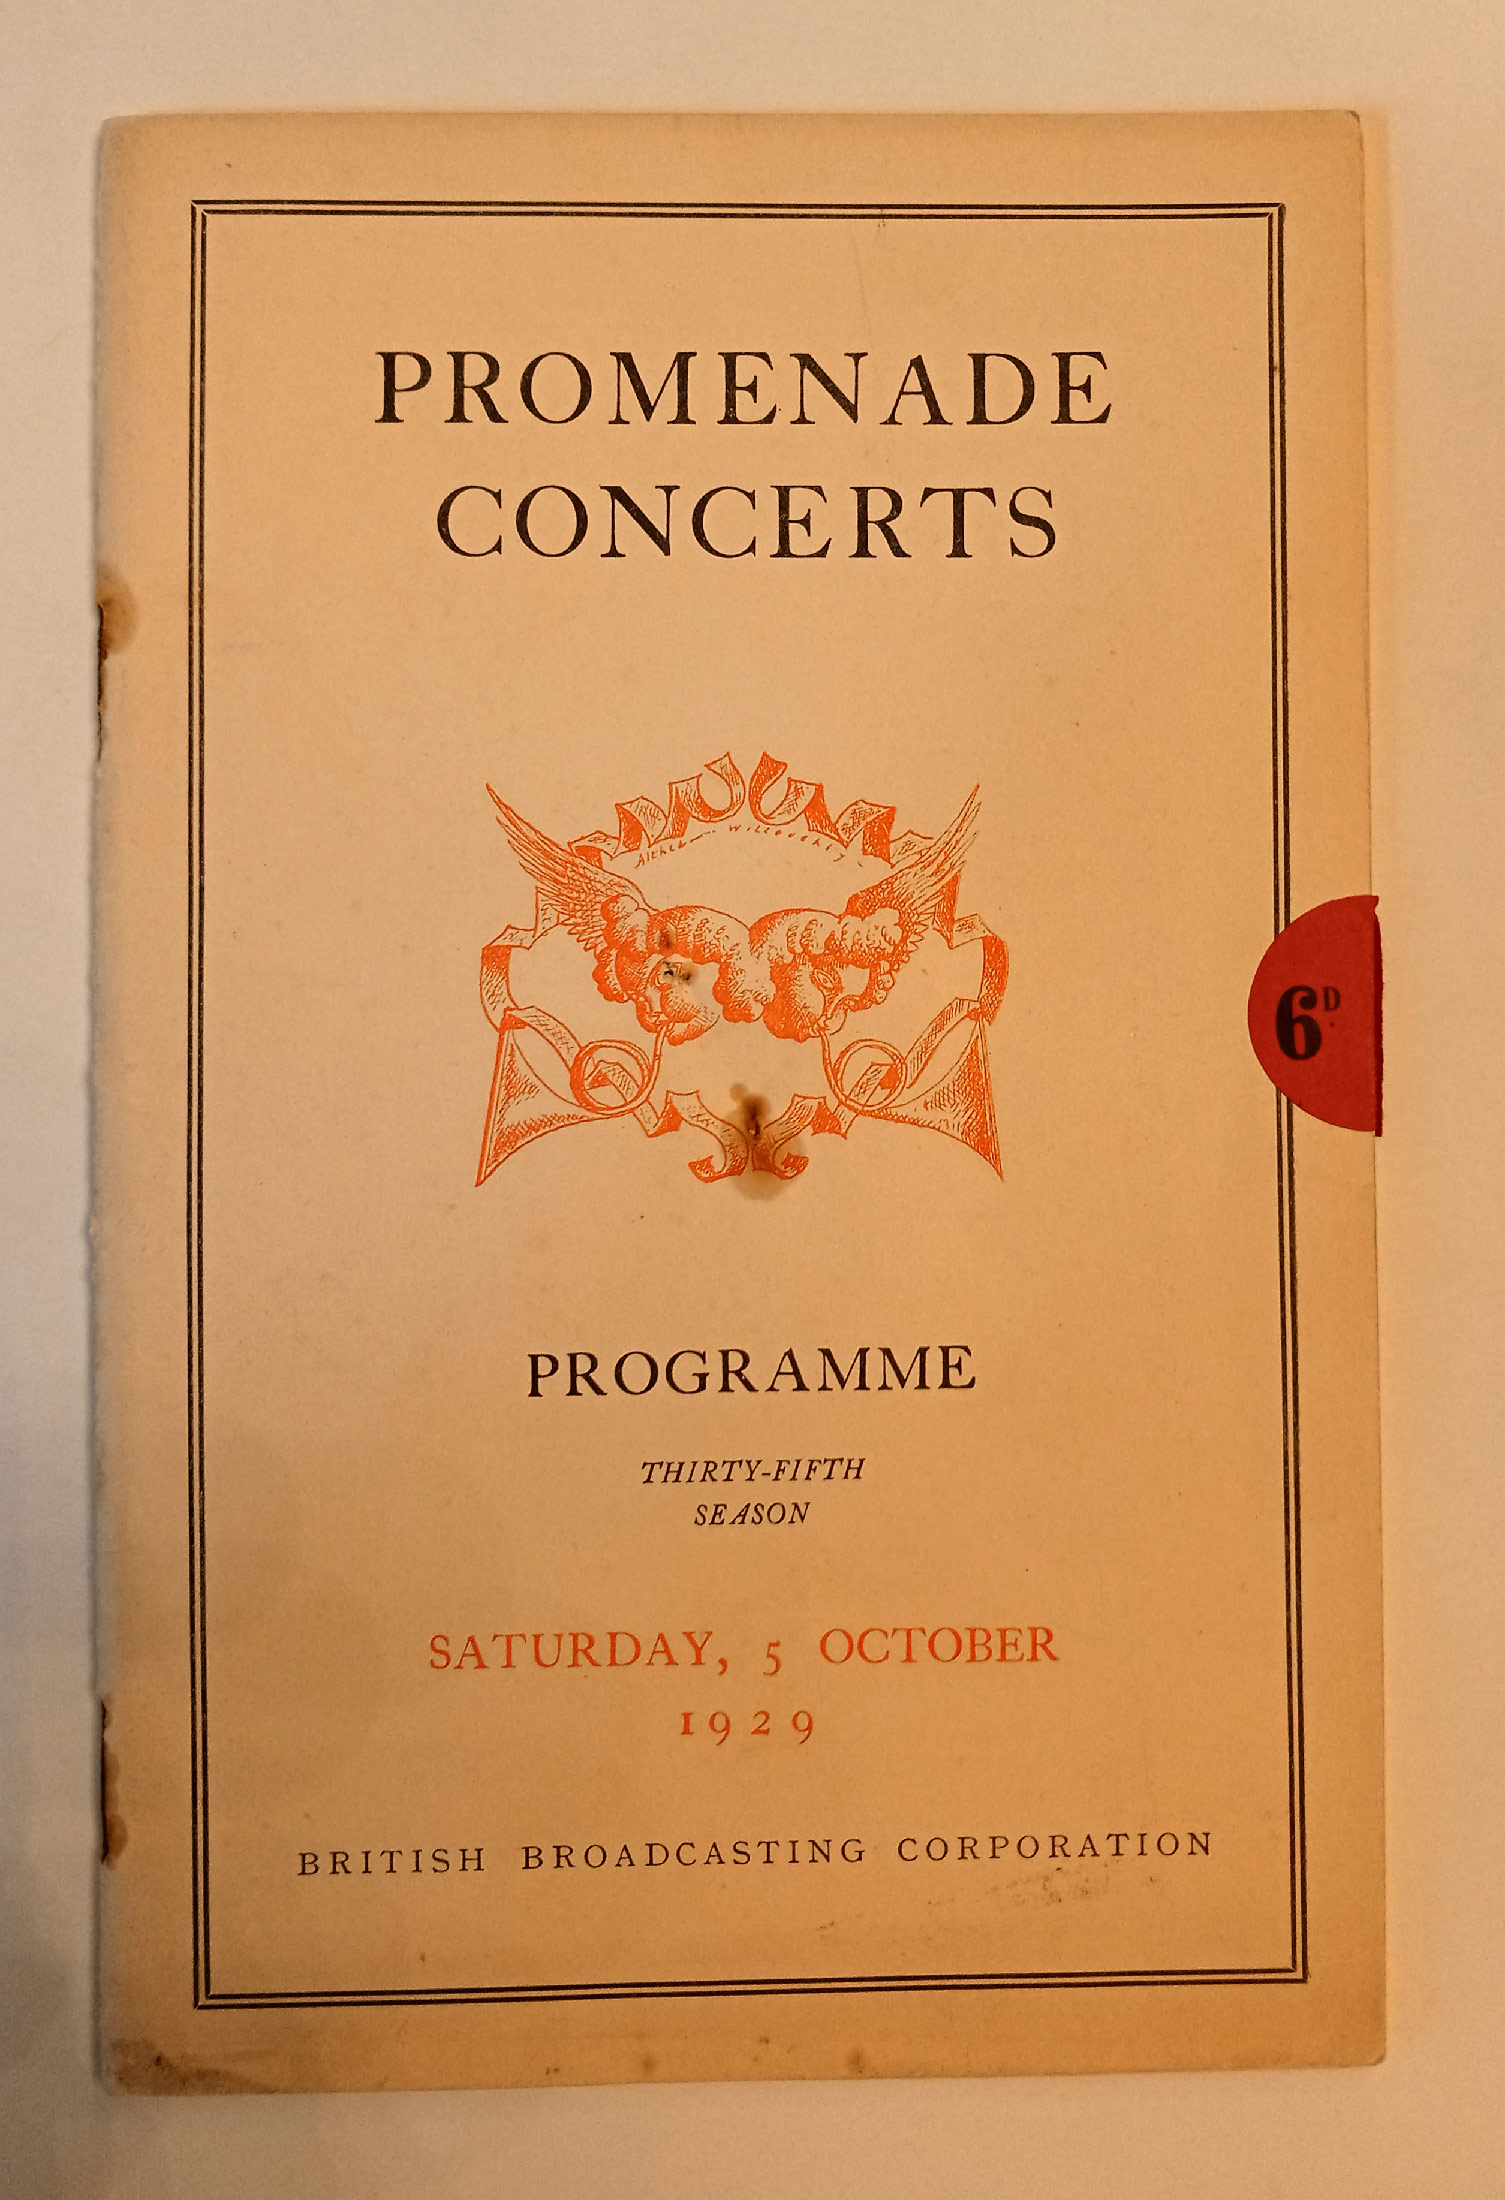 Henry Wood (1869-1944) and the Promenade Concerts.